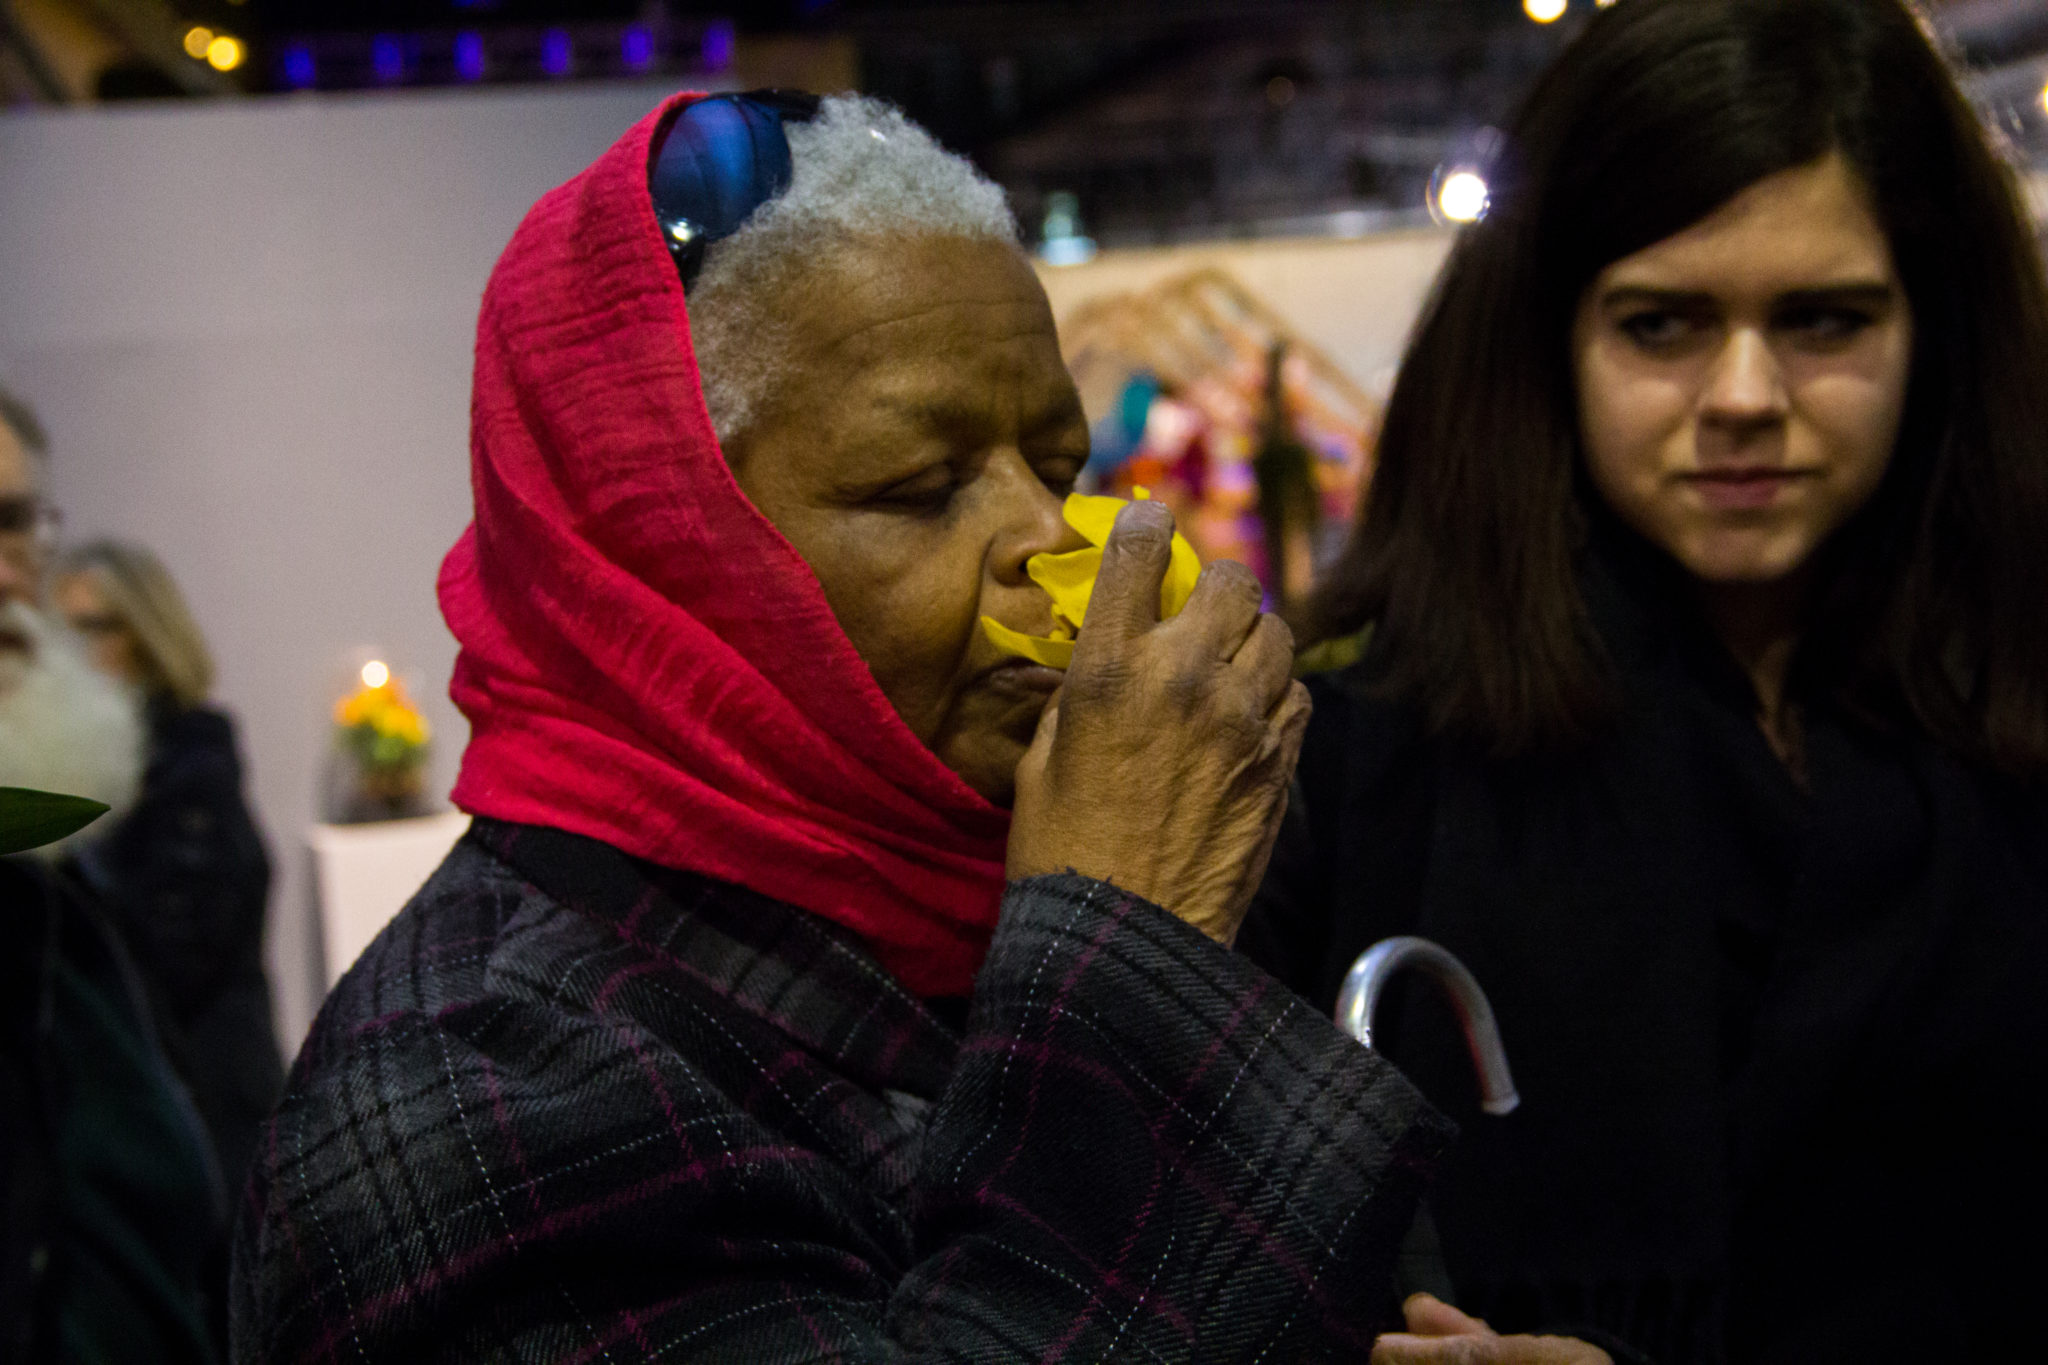 Member for Associated Services for the Blind smelling a yellow flower with big petals, at Art-Reach's 2017 audio described tour of the Philadelphia Flower Show.